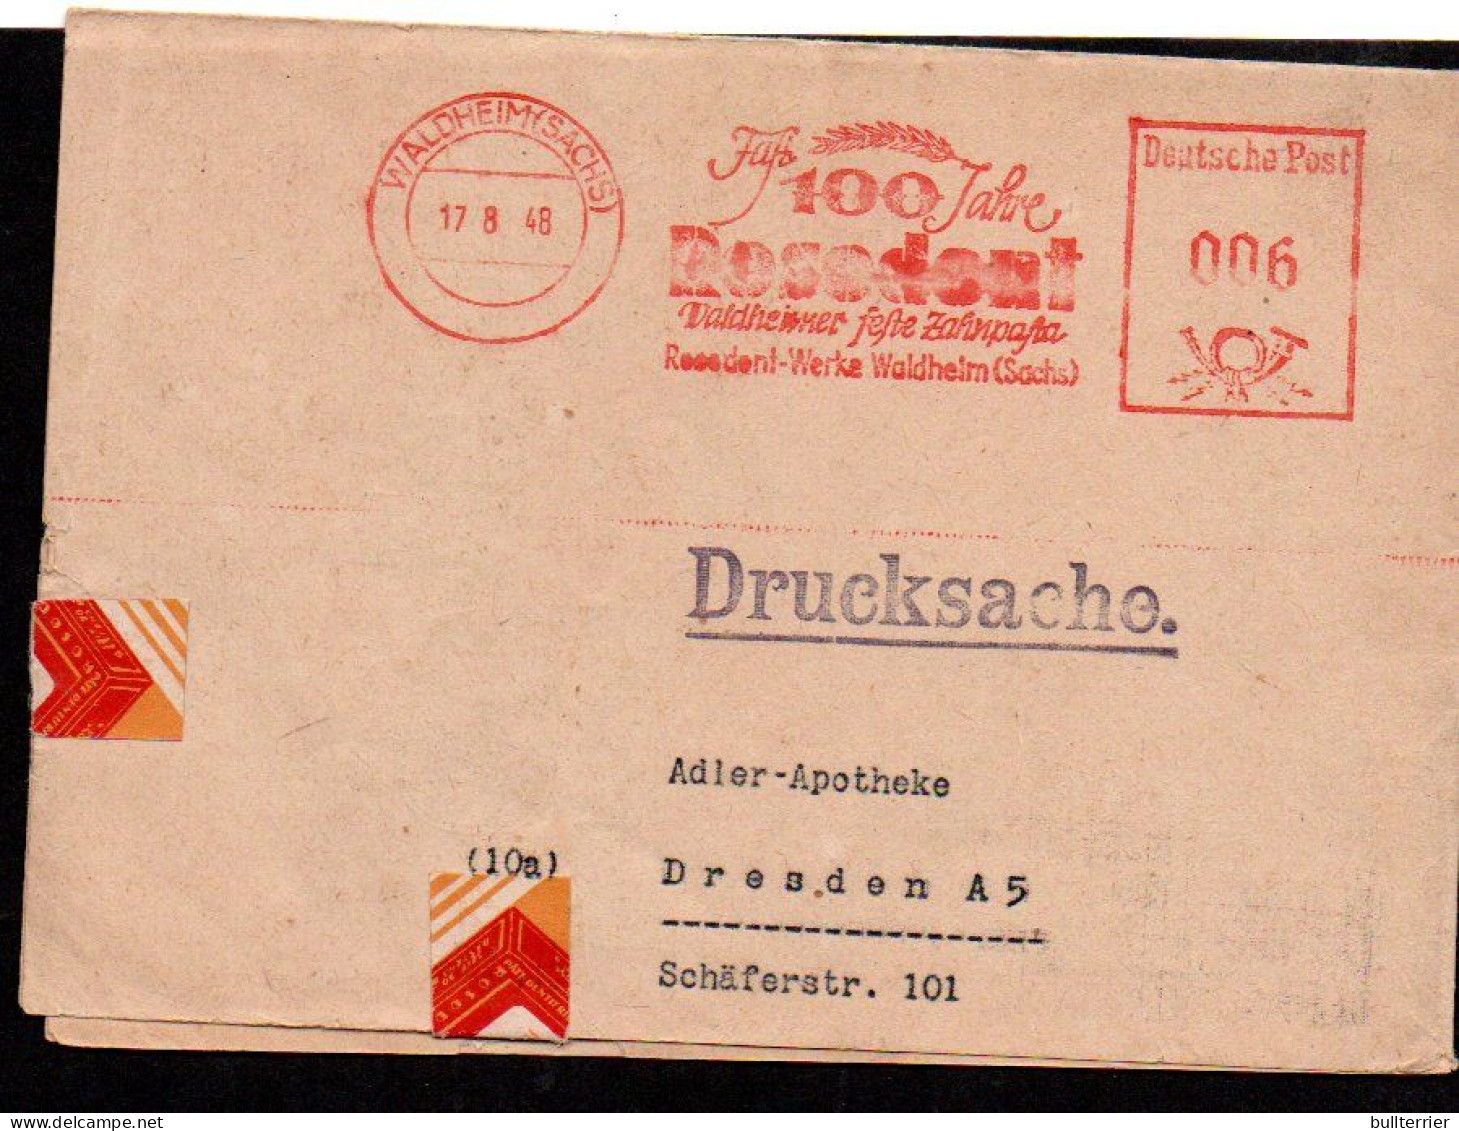 DENISTRY -  GERMANY - 1948 - COVER WALDHEIM TO DRESDEN WITH SLOGAN CANCELLATION - Medicine